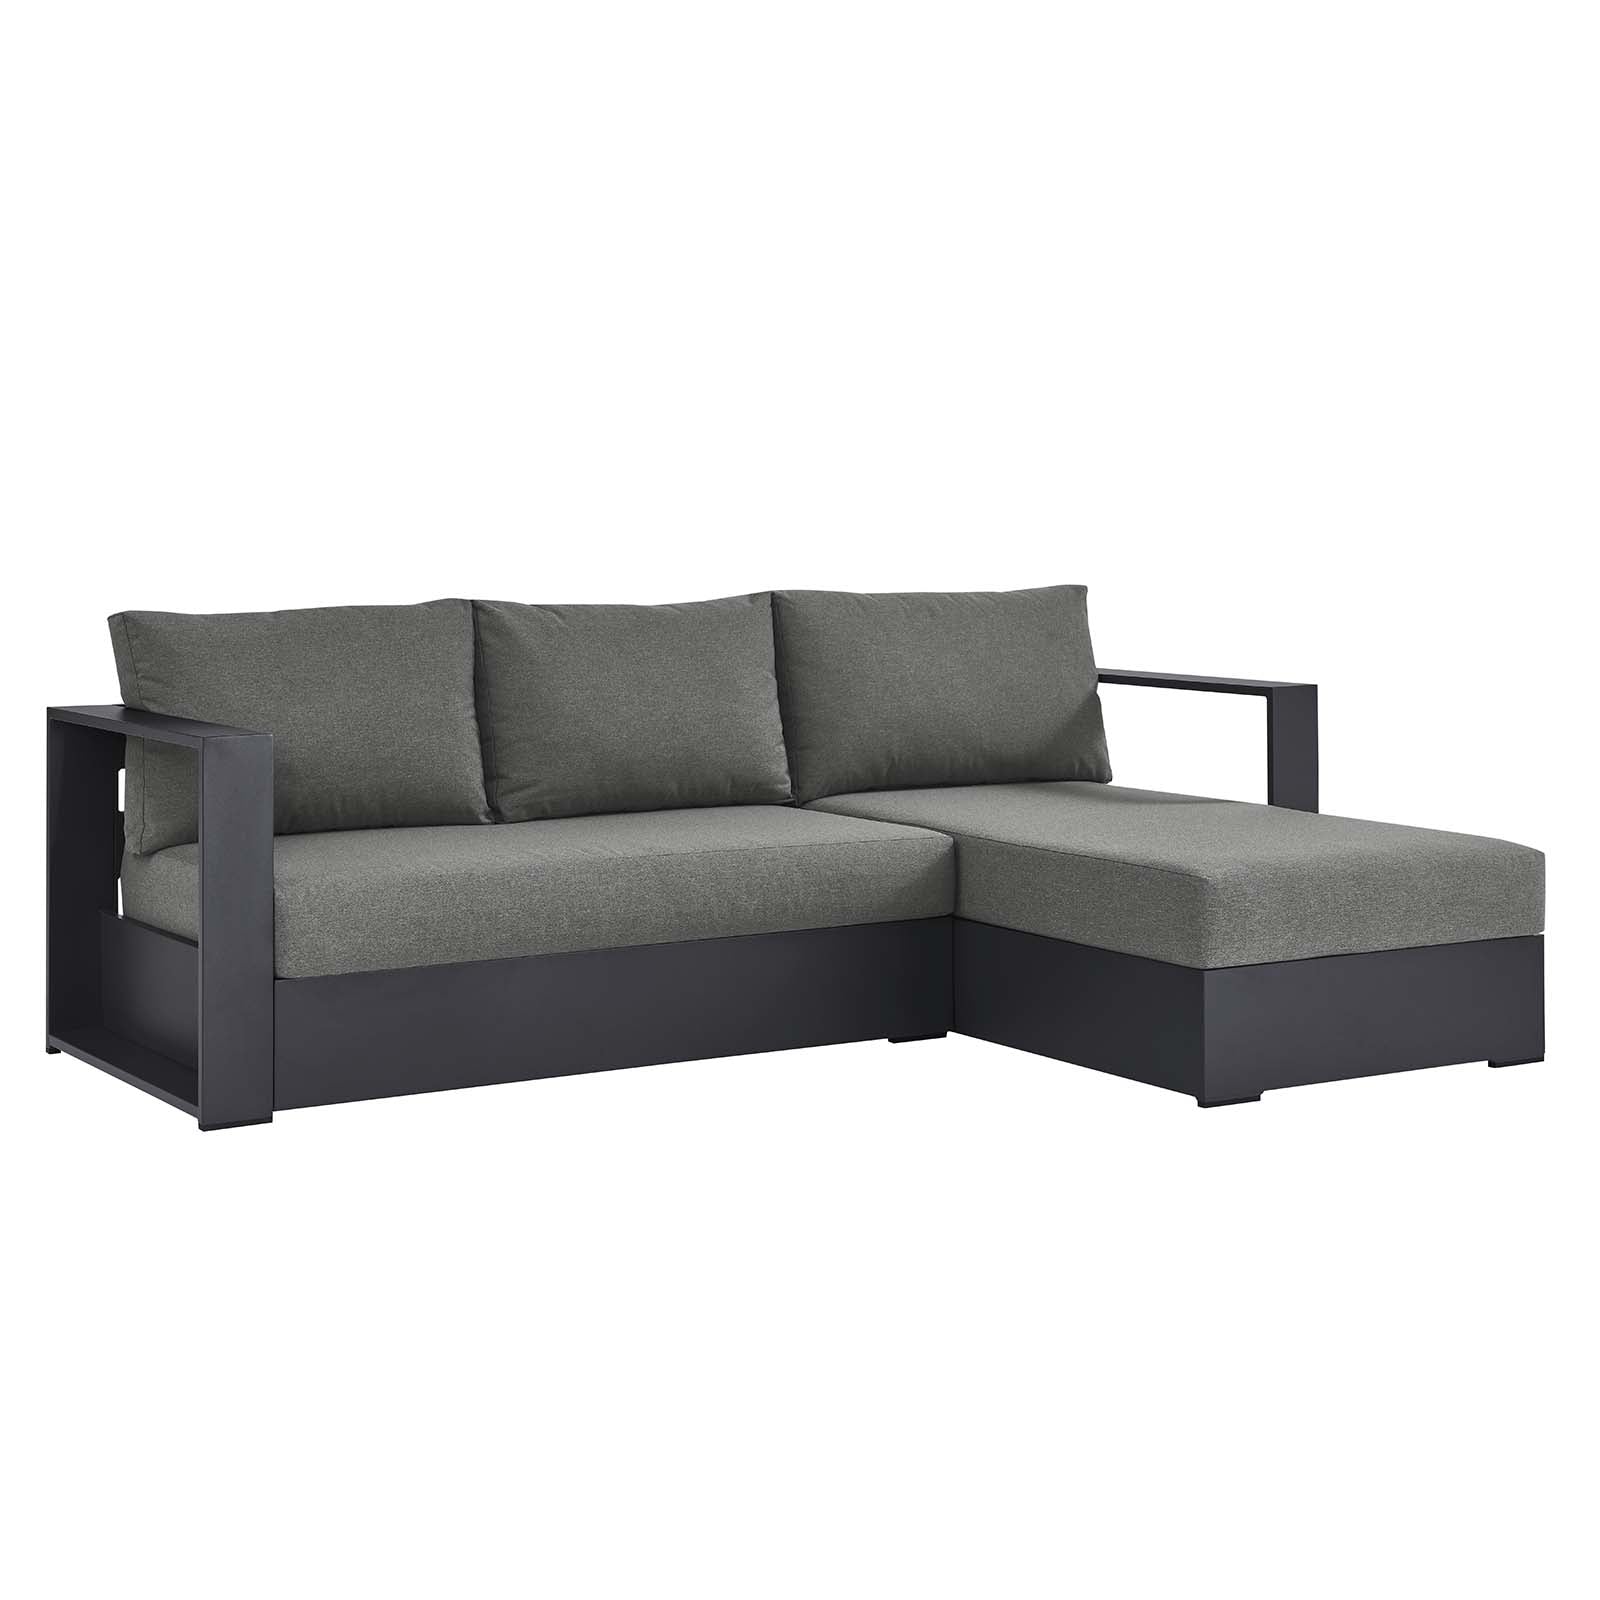 Tahoe Outdoor Patio Powder-Coated Aluminum 2-Piece Right-Facing Chaise Sectional Sofa Set - East Shore Modern Home Furnishings